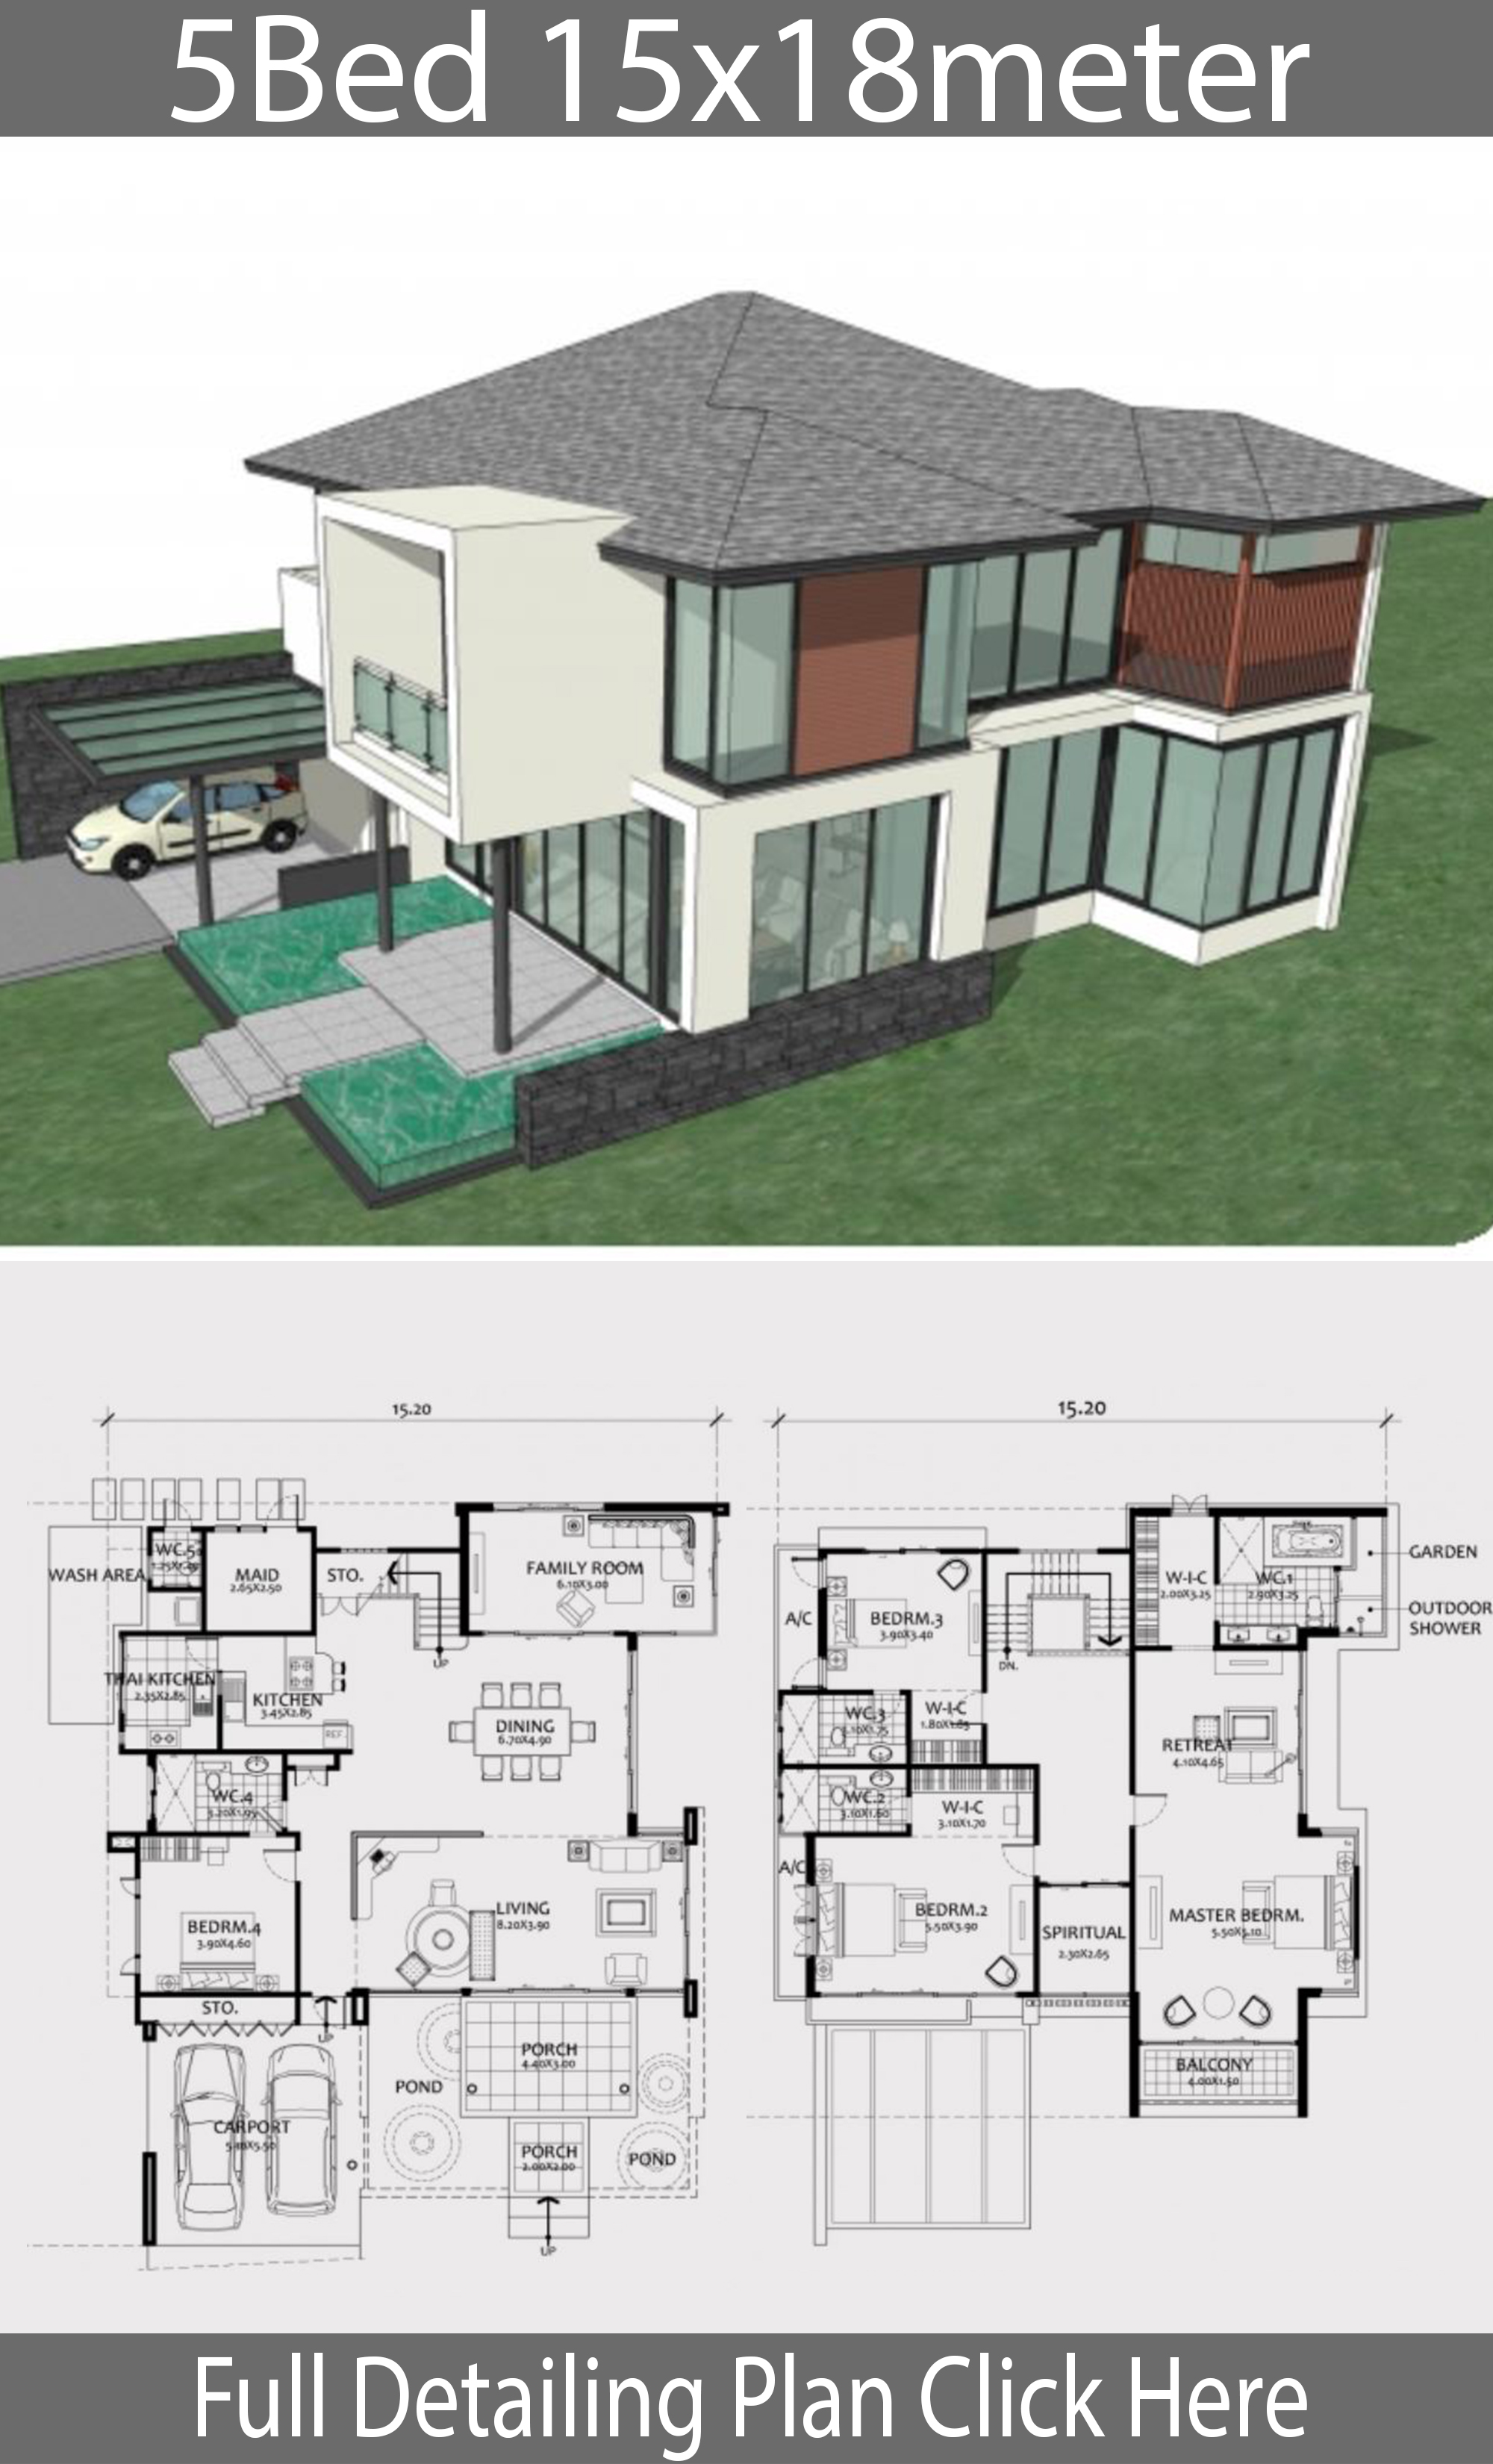 Home Design Plan 8x13m With 4 Bedrooms. - Home Design With Plansearch